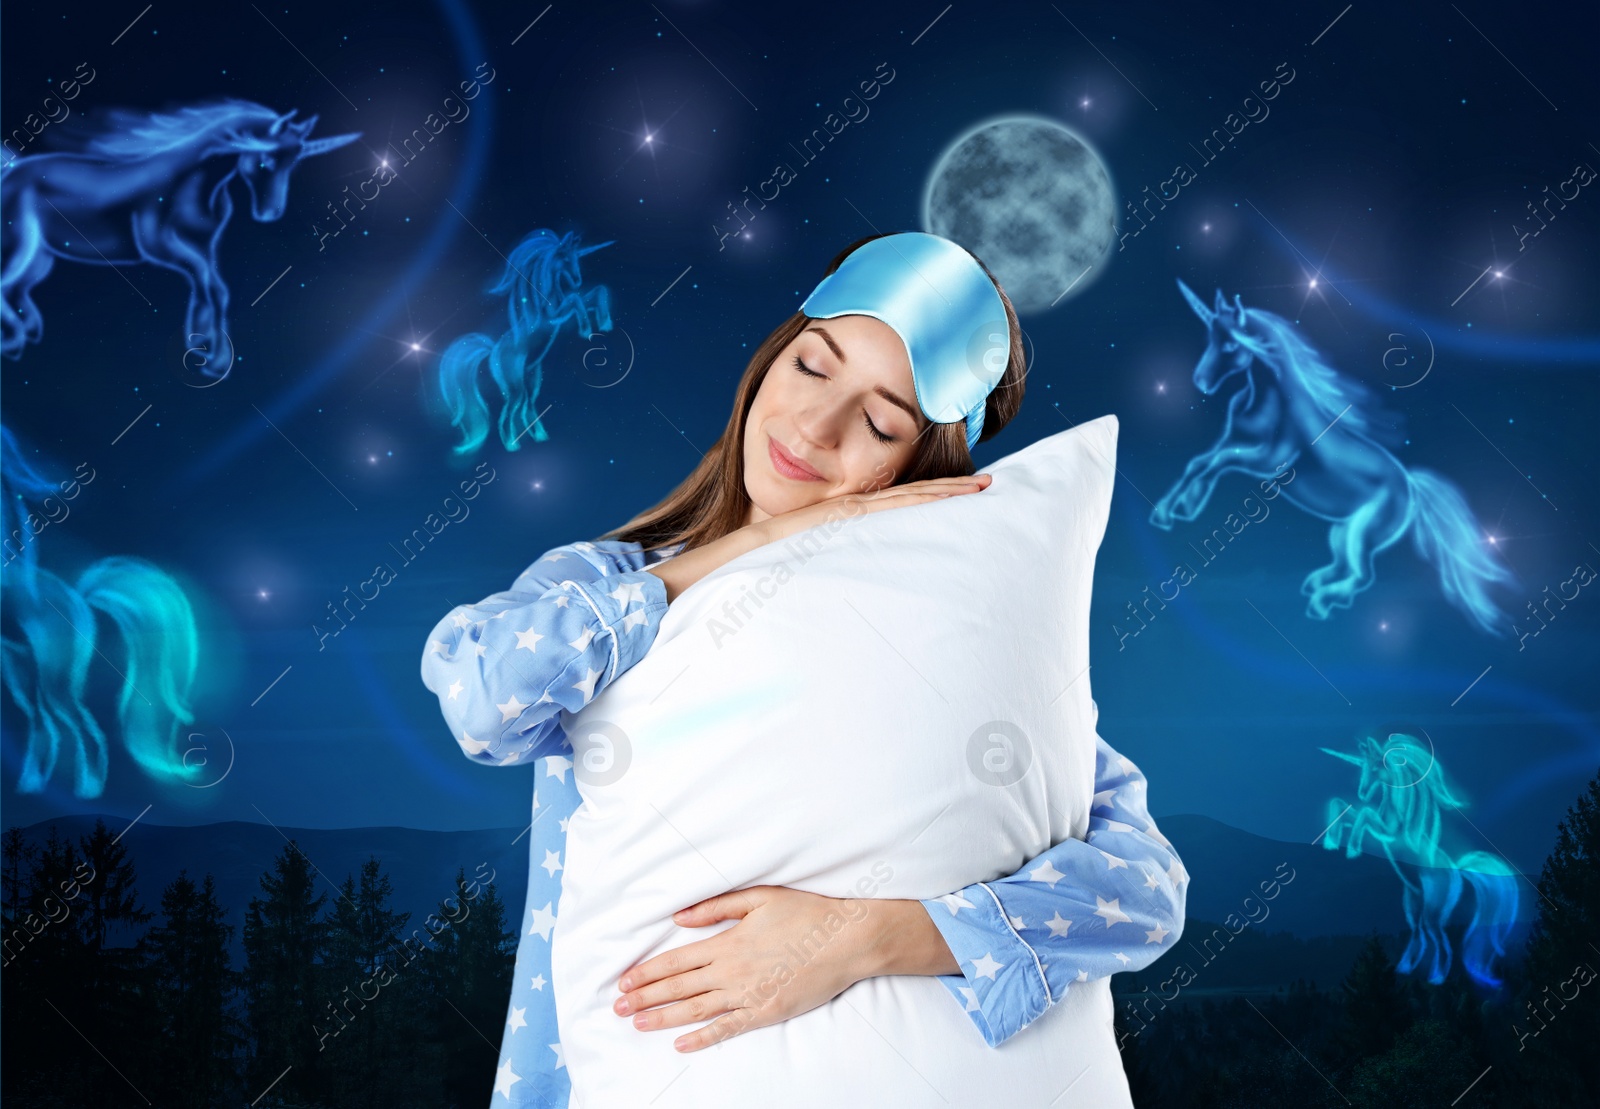 Image of Beautiful woman dreaming about unicorns while sleeping, night starry sky with full moon on background 